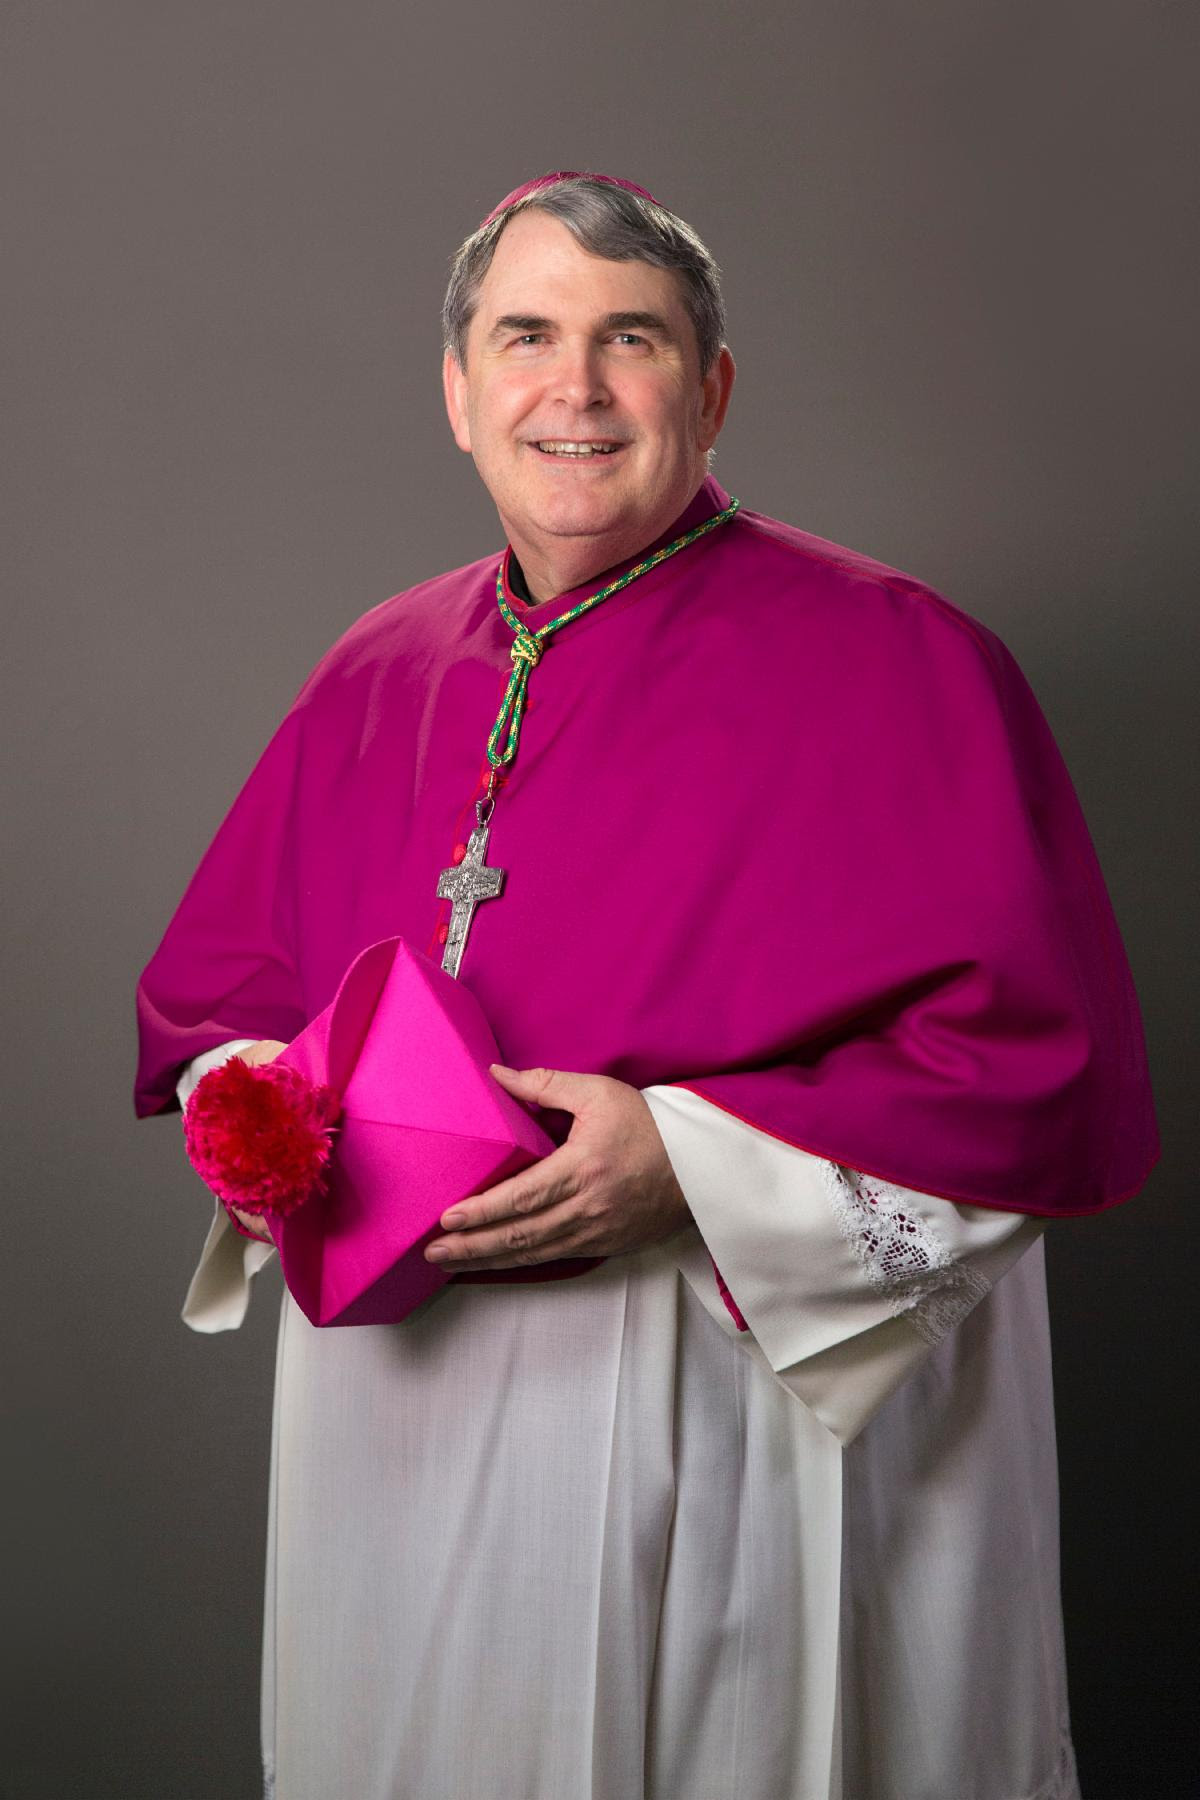 The Rev. Michael William Fisher, newly appointed bishop of the Diocese of Buffalo. (Image courtesy of the diocese)